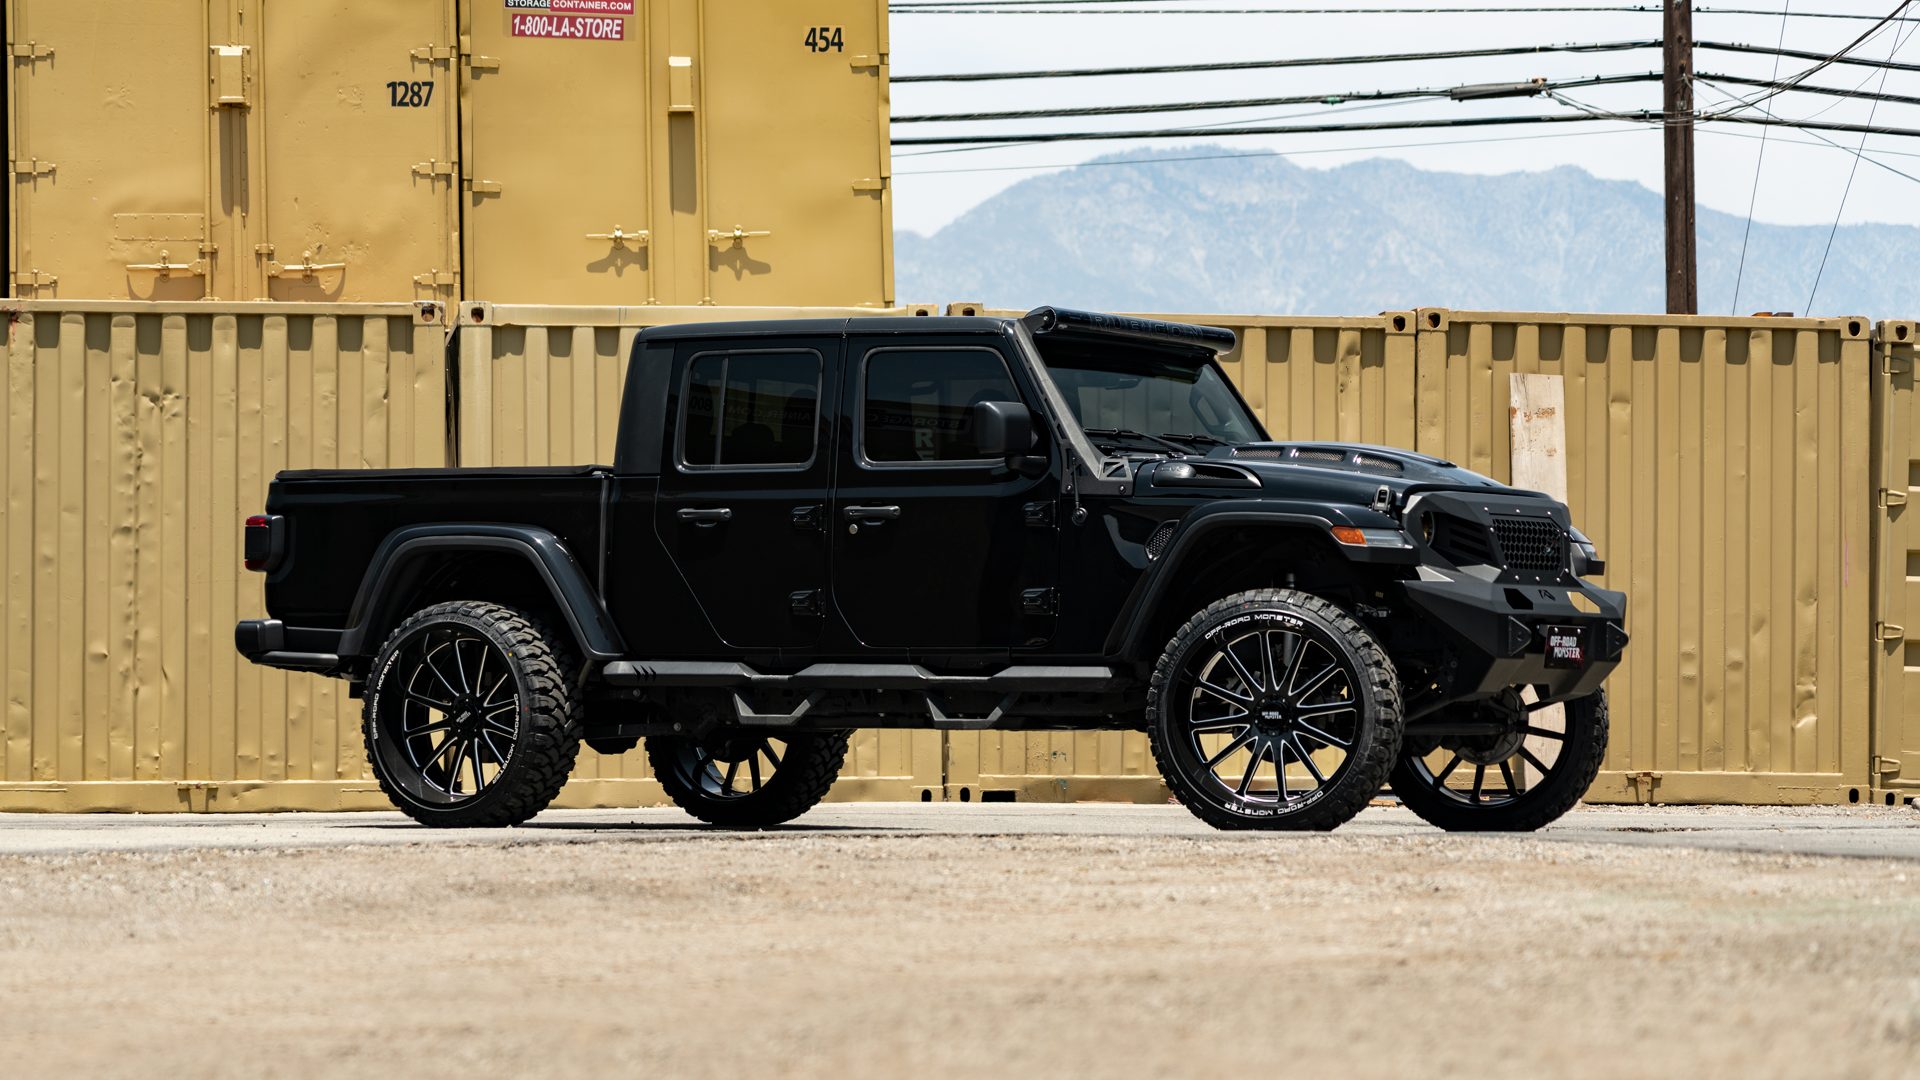 OffRoad Monsterm26 26x12 Wheels on a Jeep Gladiator